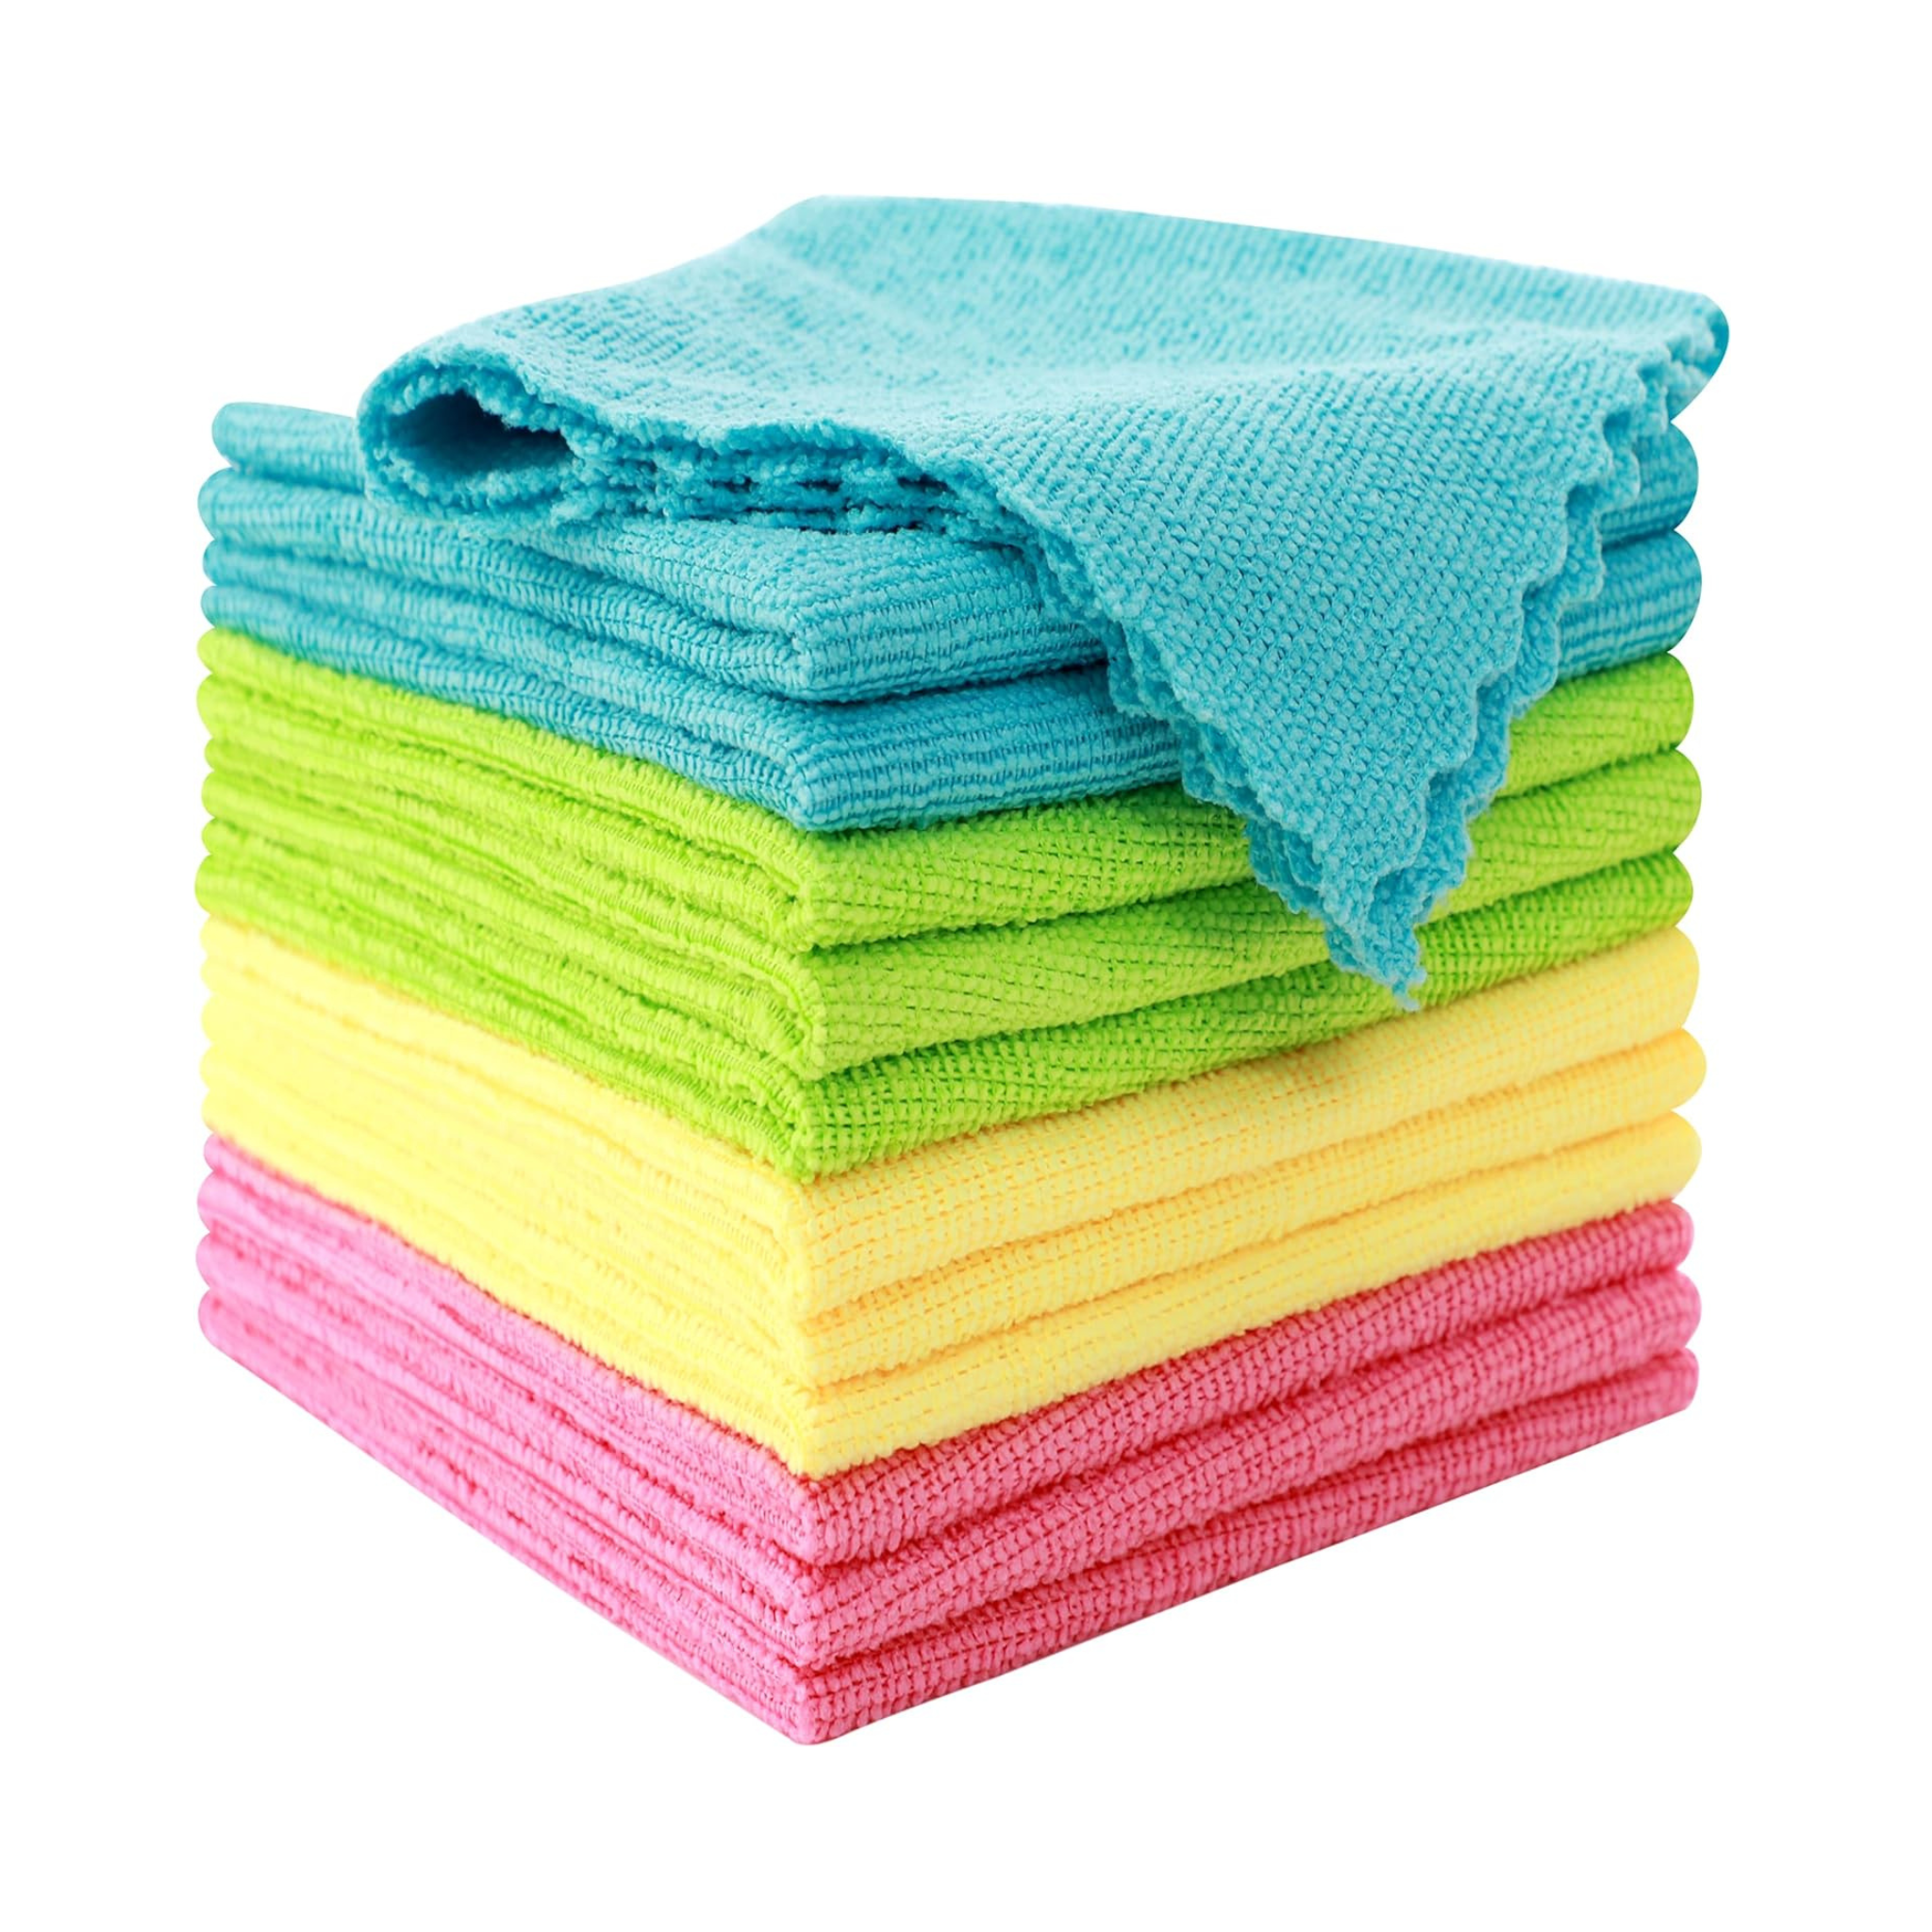 12-Pack Microfiber Cleaning Cloths, 12"X12"